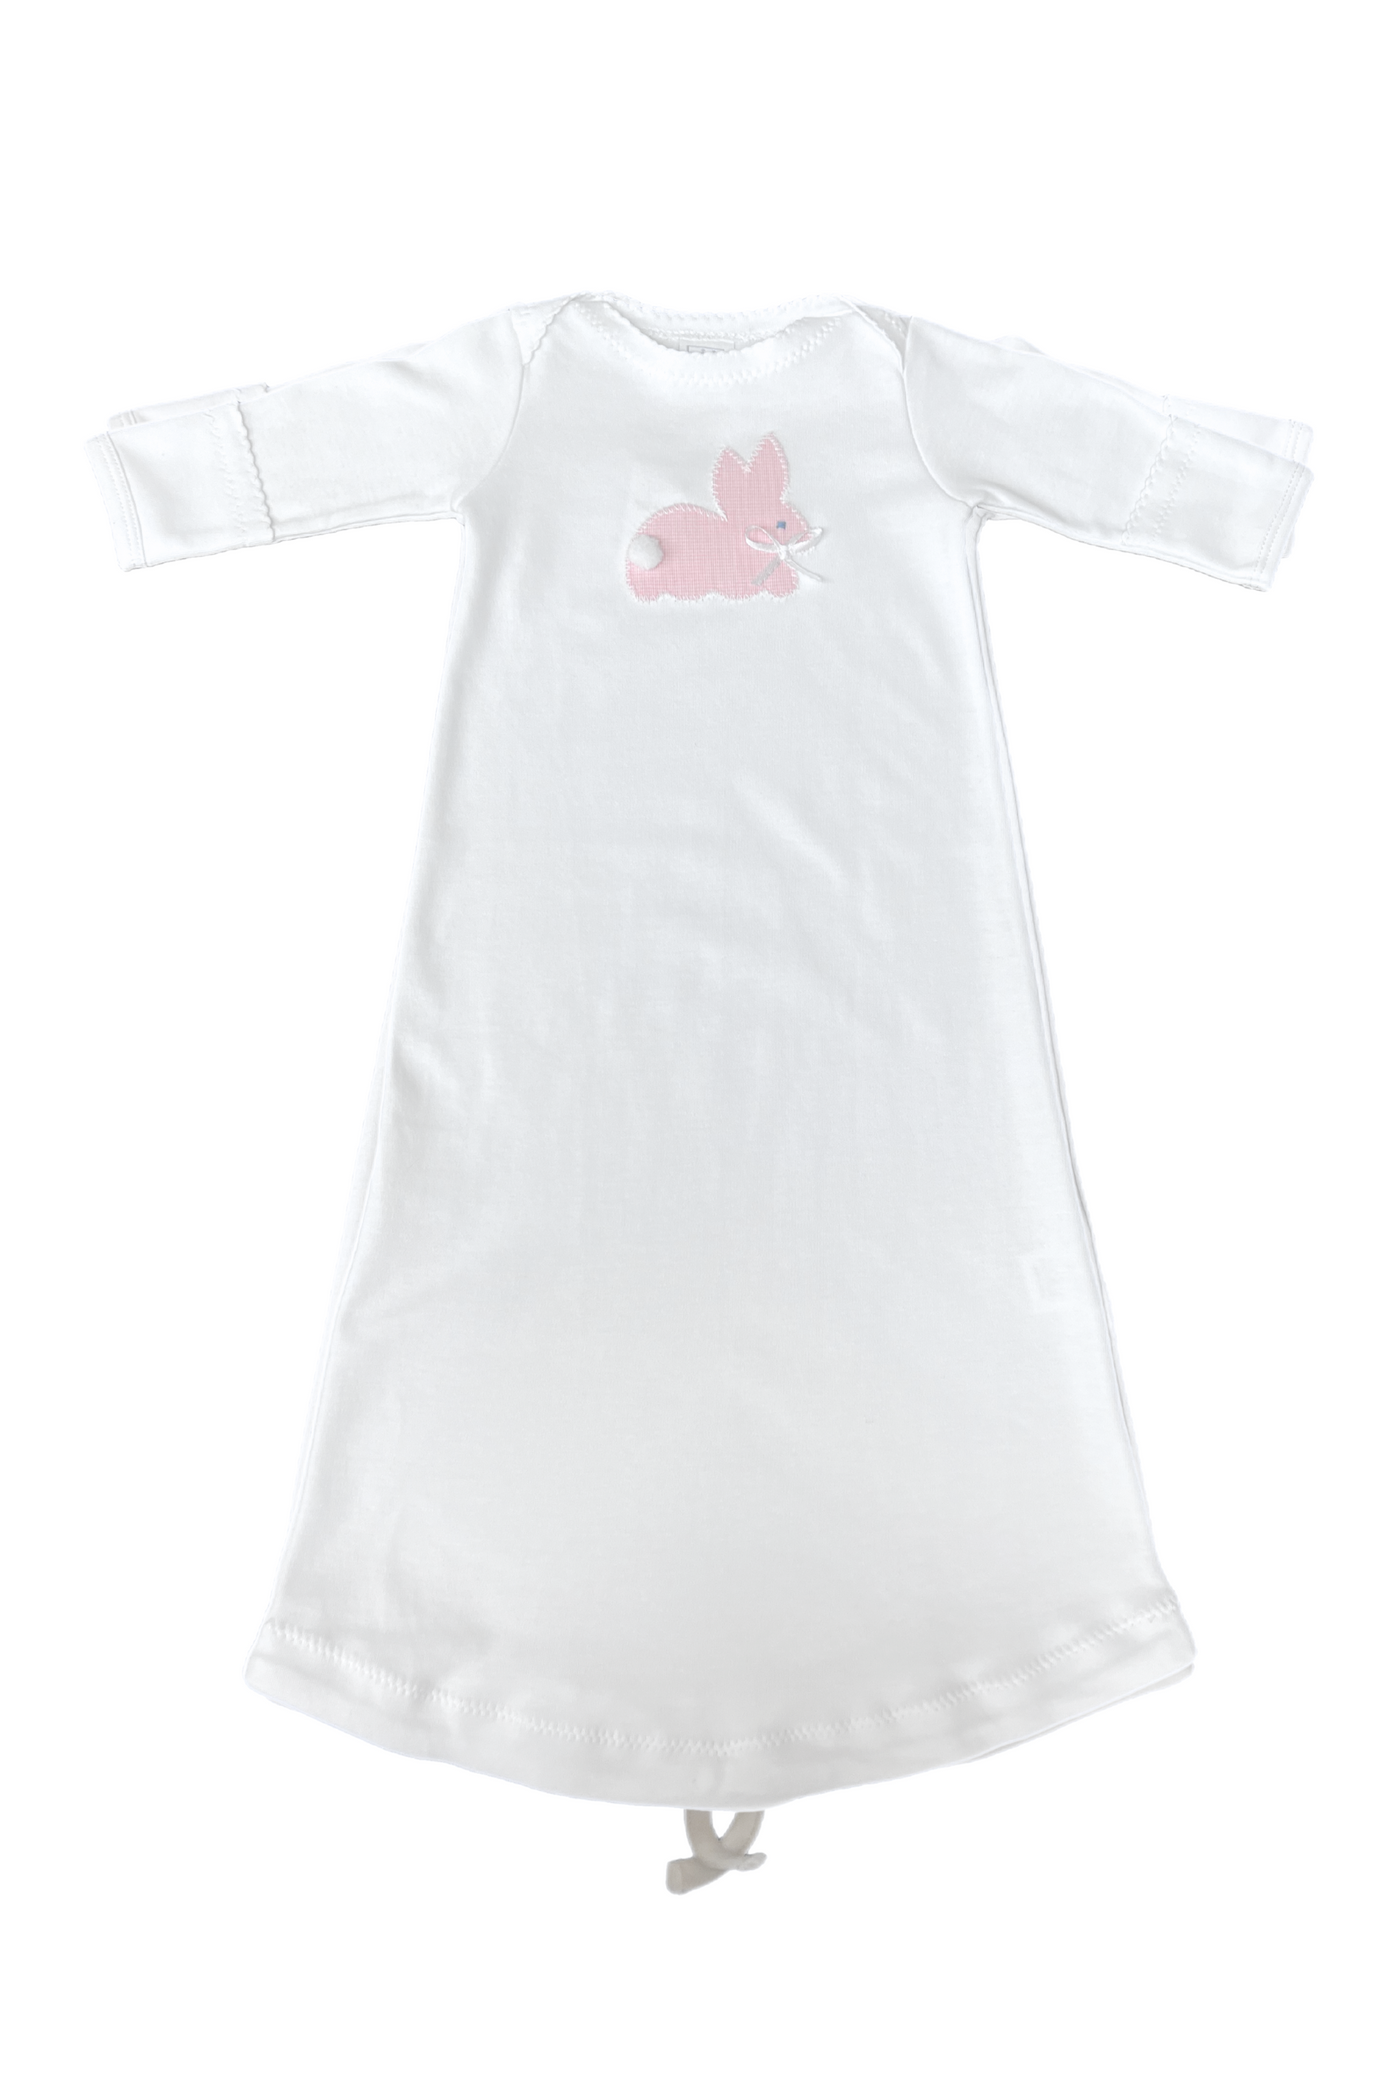 JJ Applique Day Gown Pink Micro Gingham Bunny